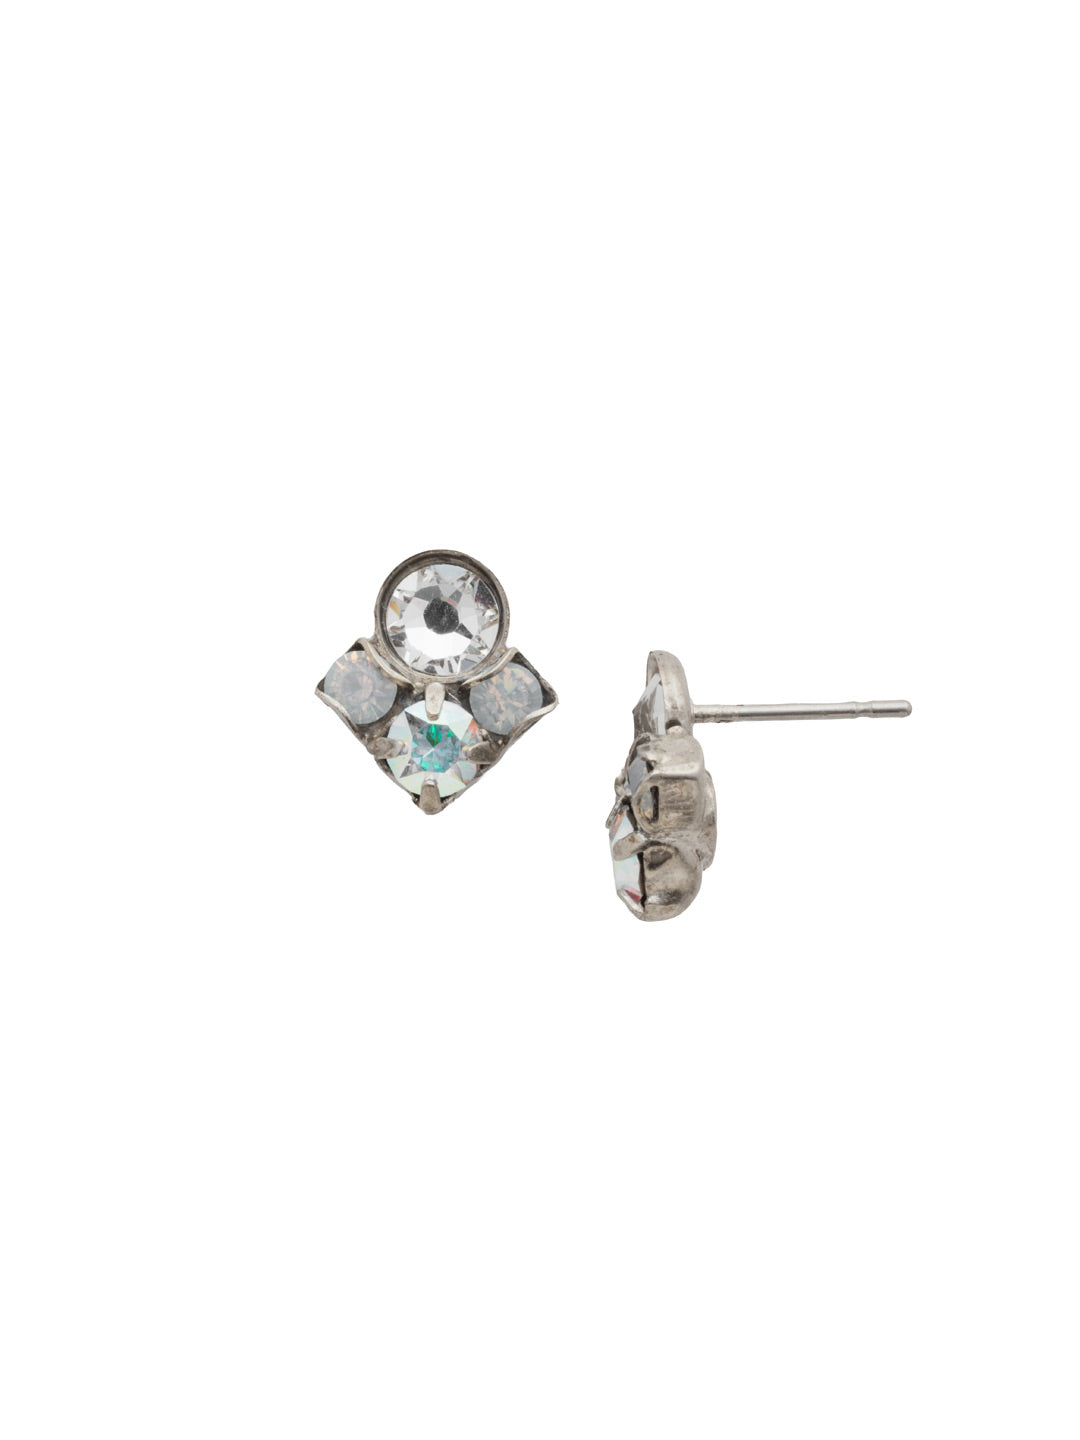 Petite Crystal Cluster Post Earring - EDA19ASWBR - <p>These petite posts feature a cluster pattern of stones for a sweet touch of sparkle. These cluster posts will be perfect for any occasion! From Sorrelli's White Bridal collection in our Antique Silver-tone finish.</p>